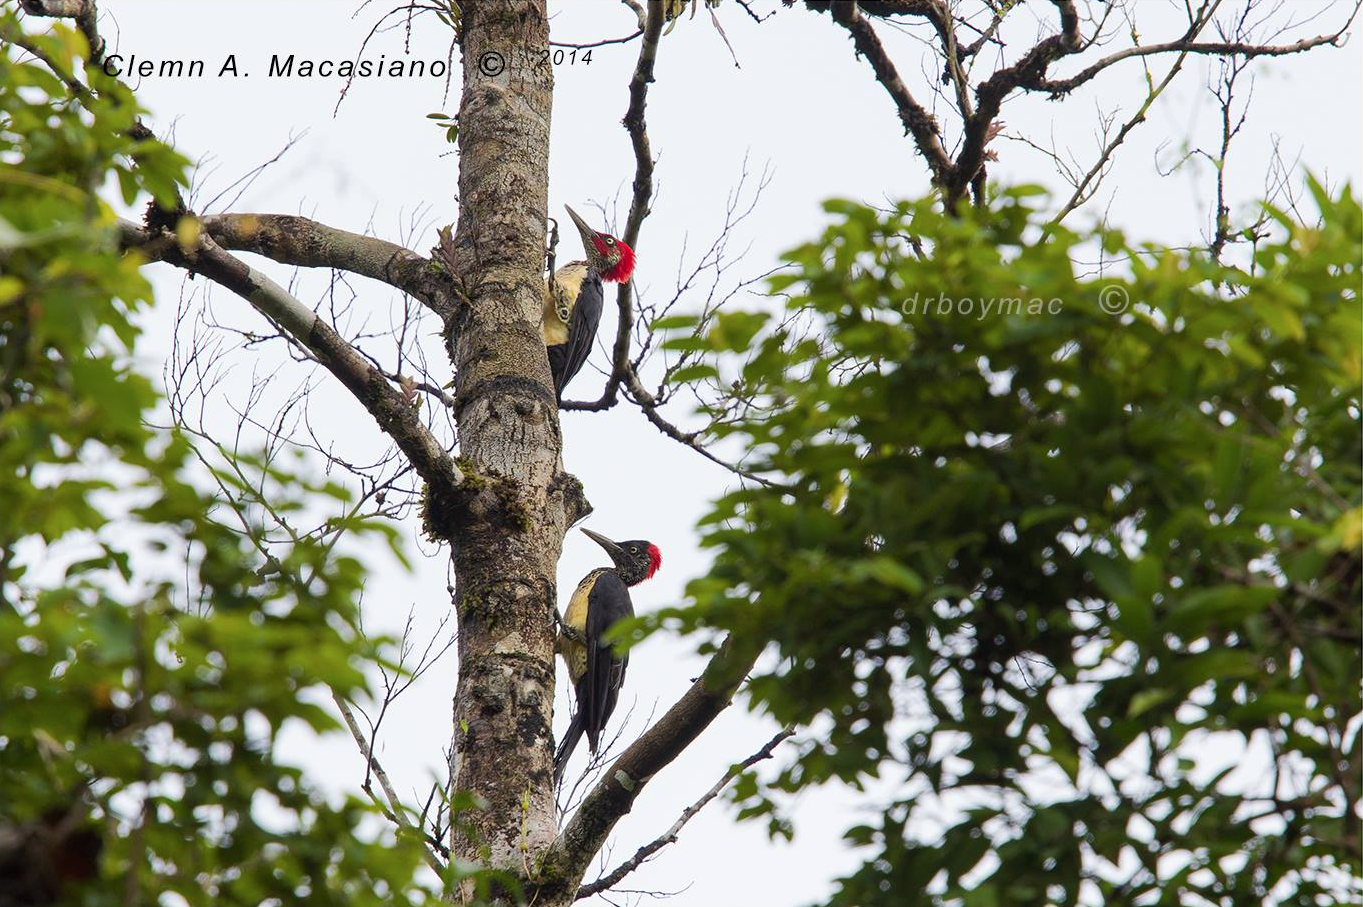 White-bellied Woodpecker Dryocopus javensis by Clemn Macasiano. 